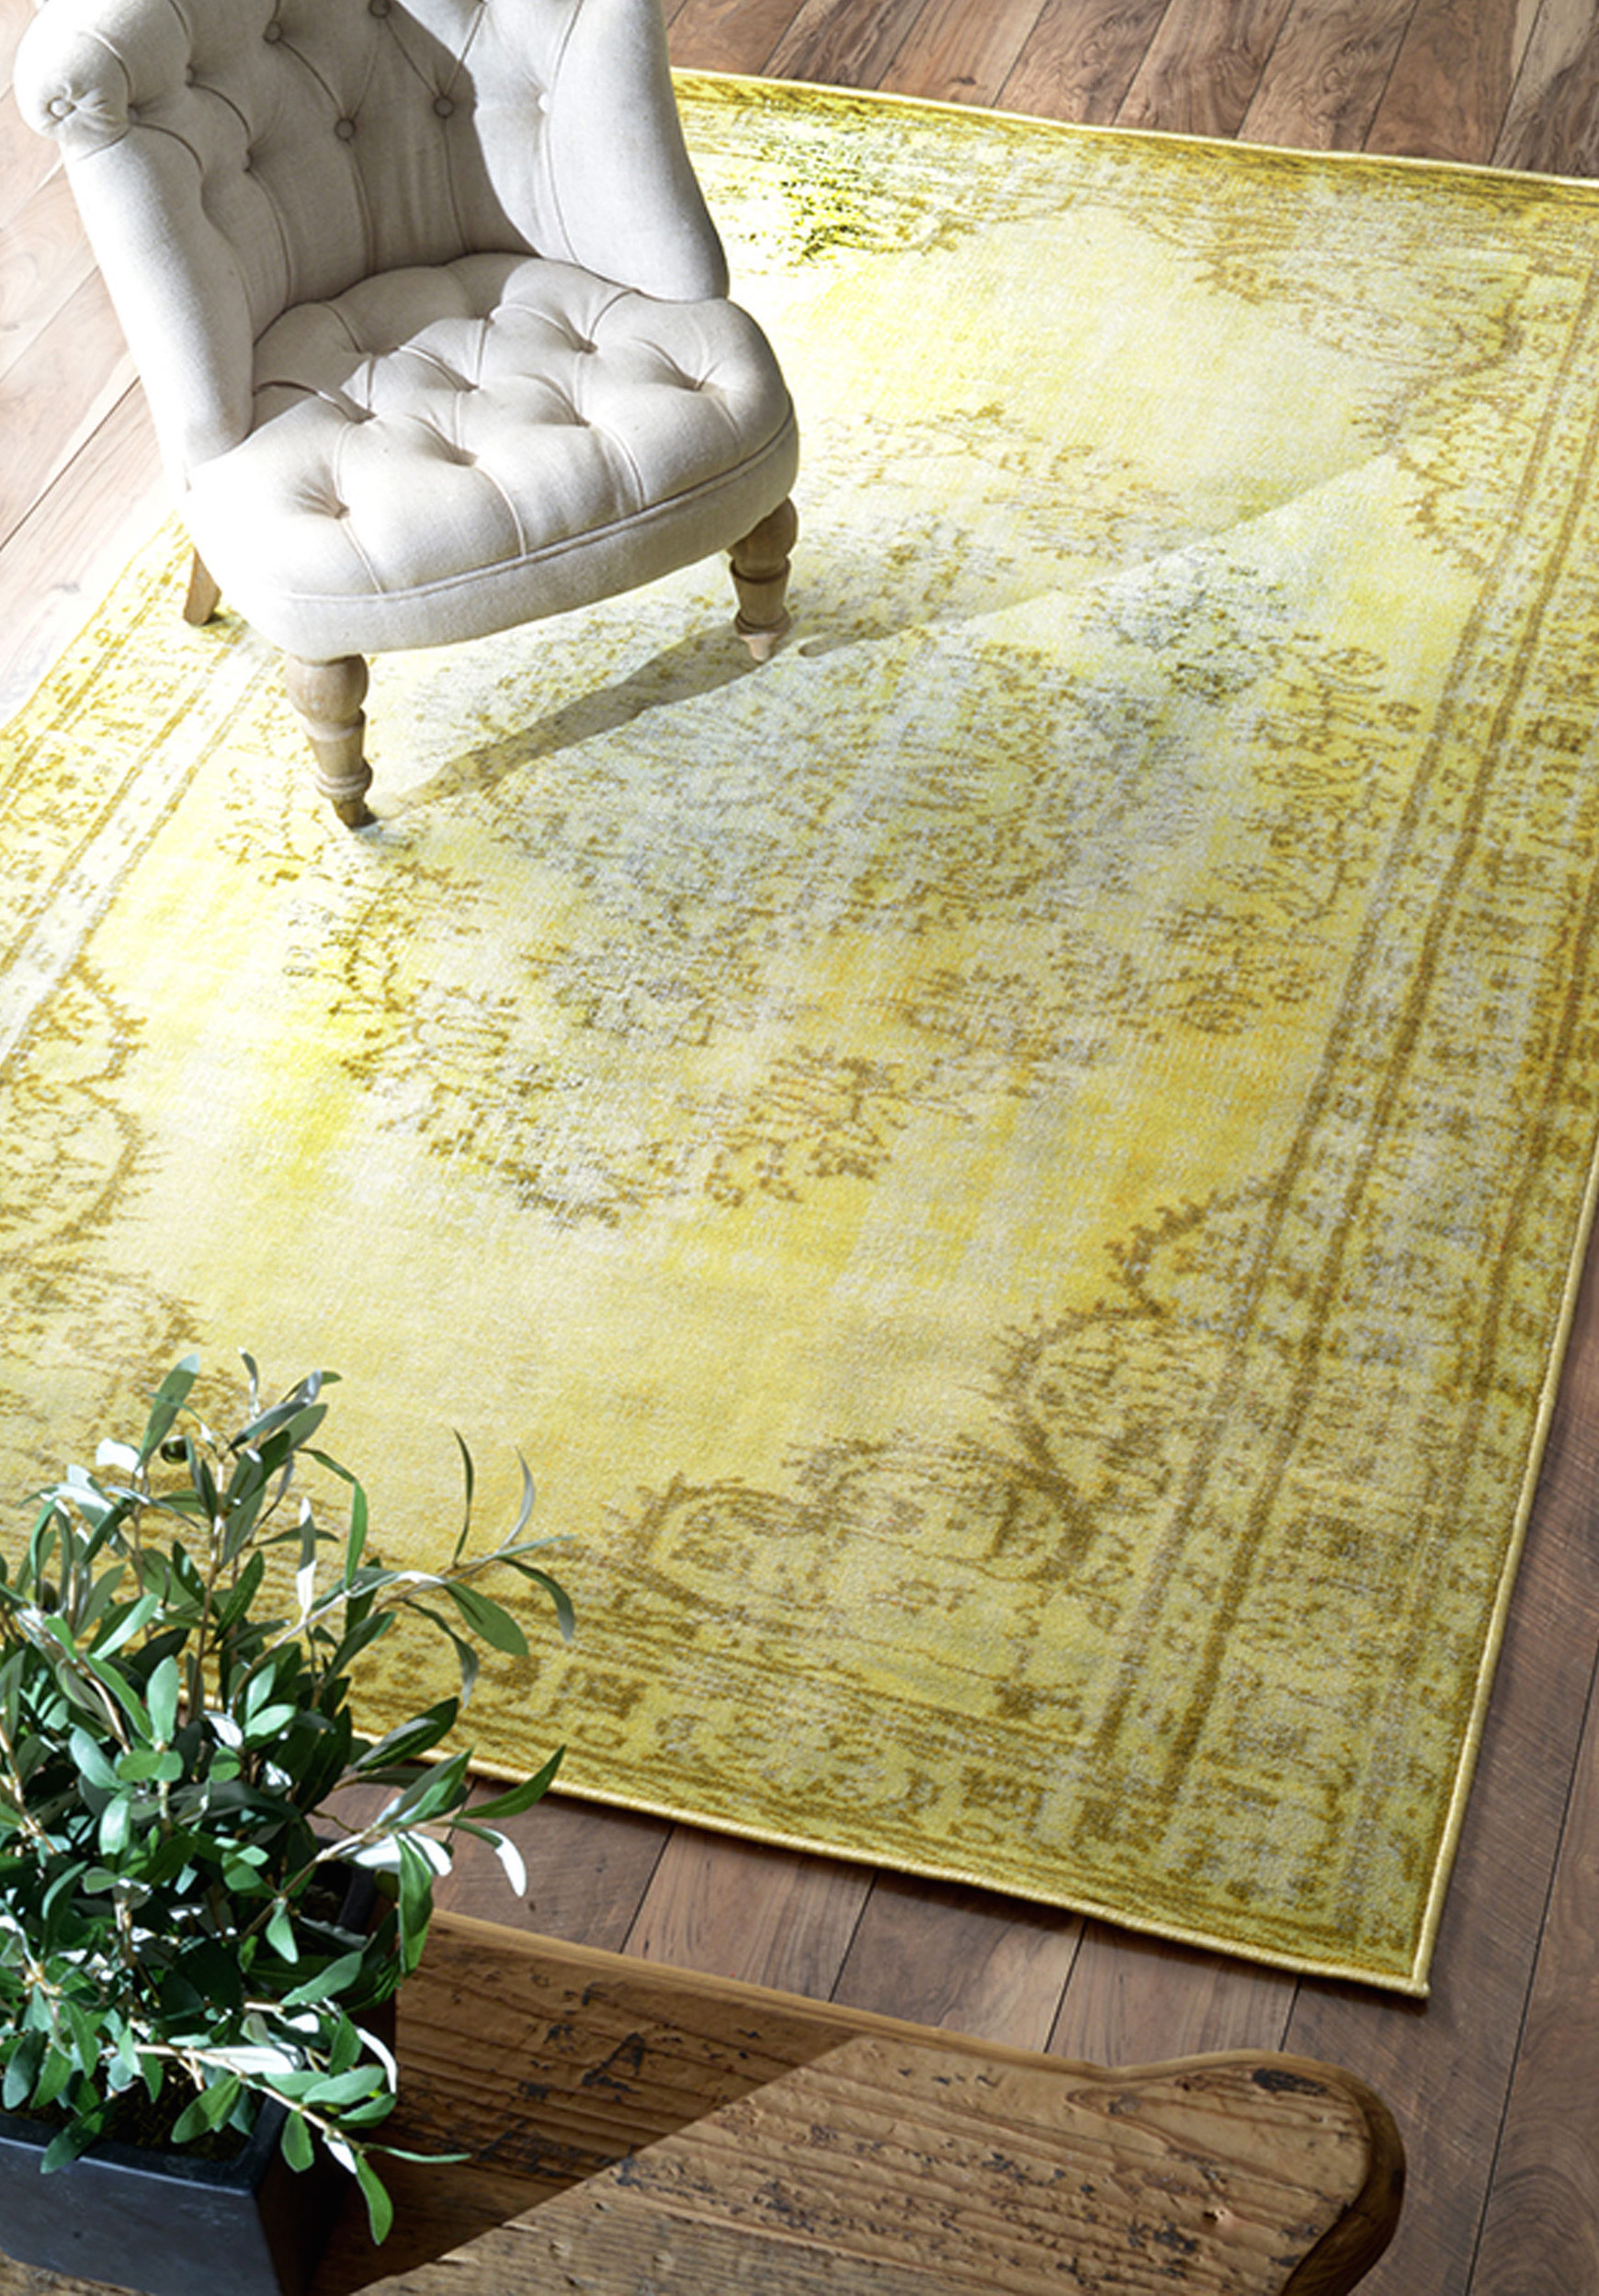 Vintage yellow nuLOOM rug from Overstock